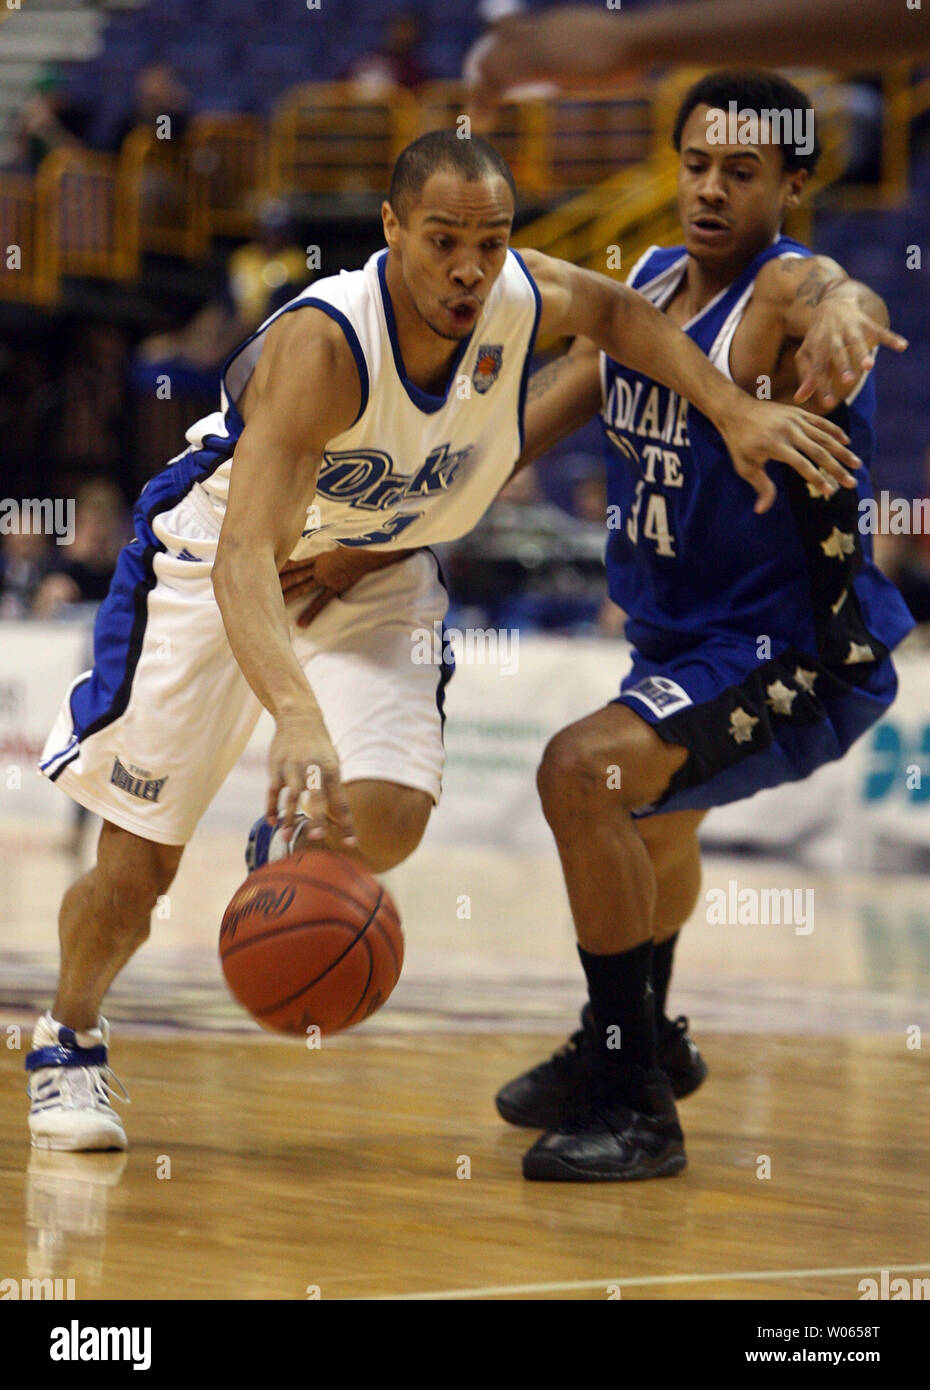 Drake Bulldogs Chaun Brooks (L) pushes the basketball past Indiana State Sycamores David Moss during the first half of the Missouri Valley Tournament at the Savvis Center in St. Louis on March 2, 2006. (UPI Photo/Bill Greenblatt) Stock Photo